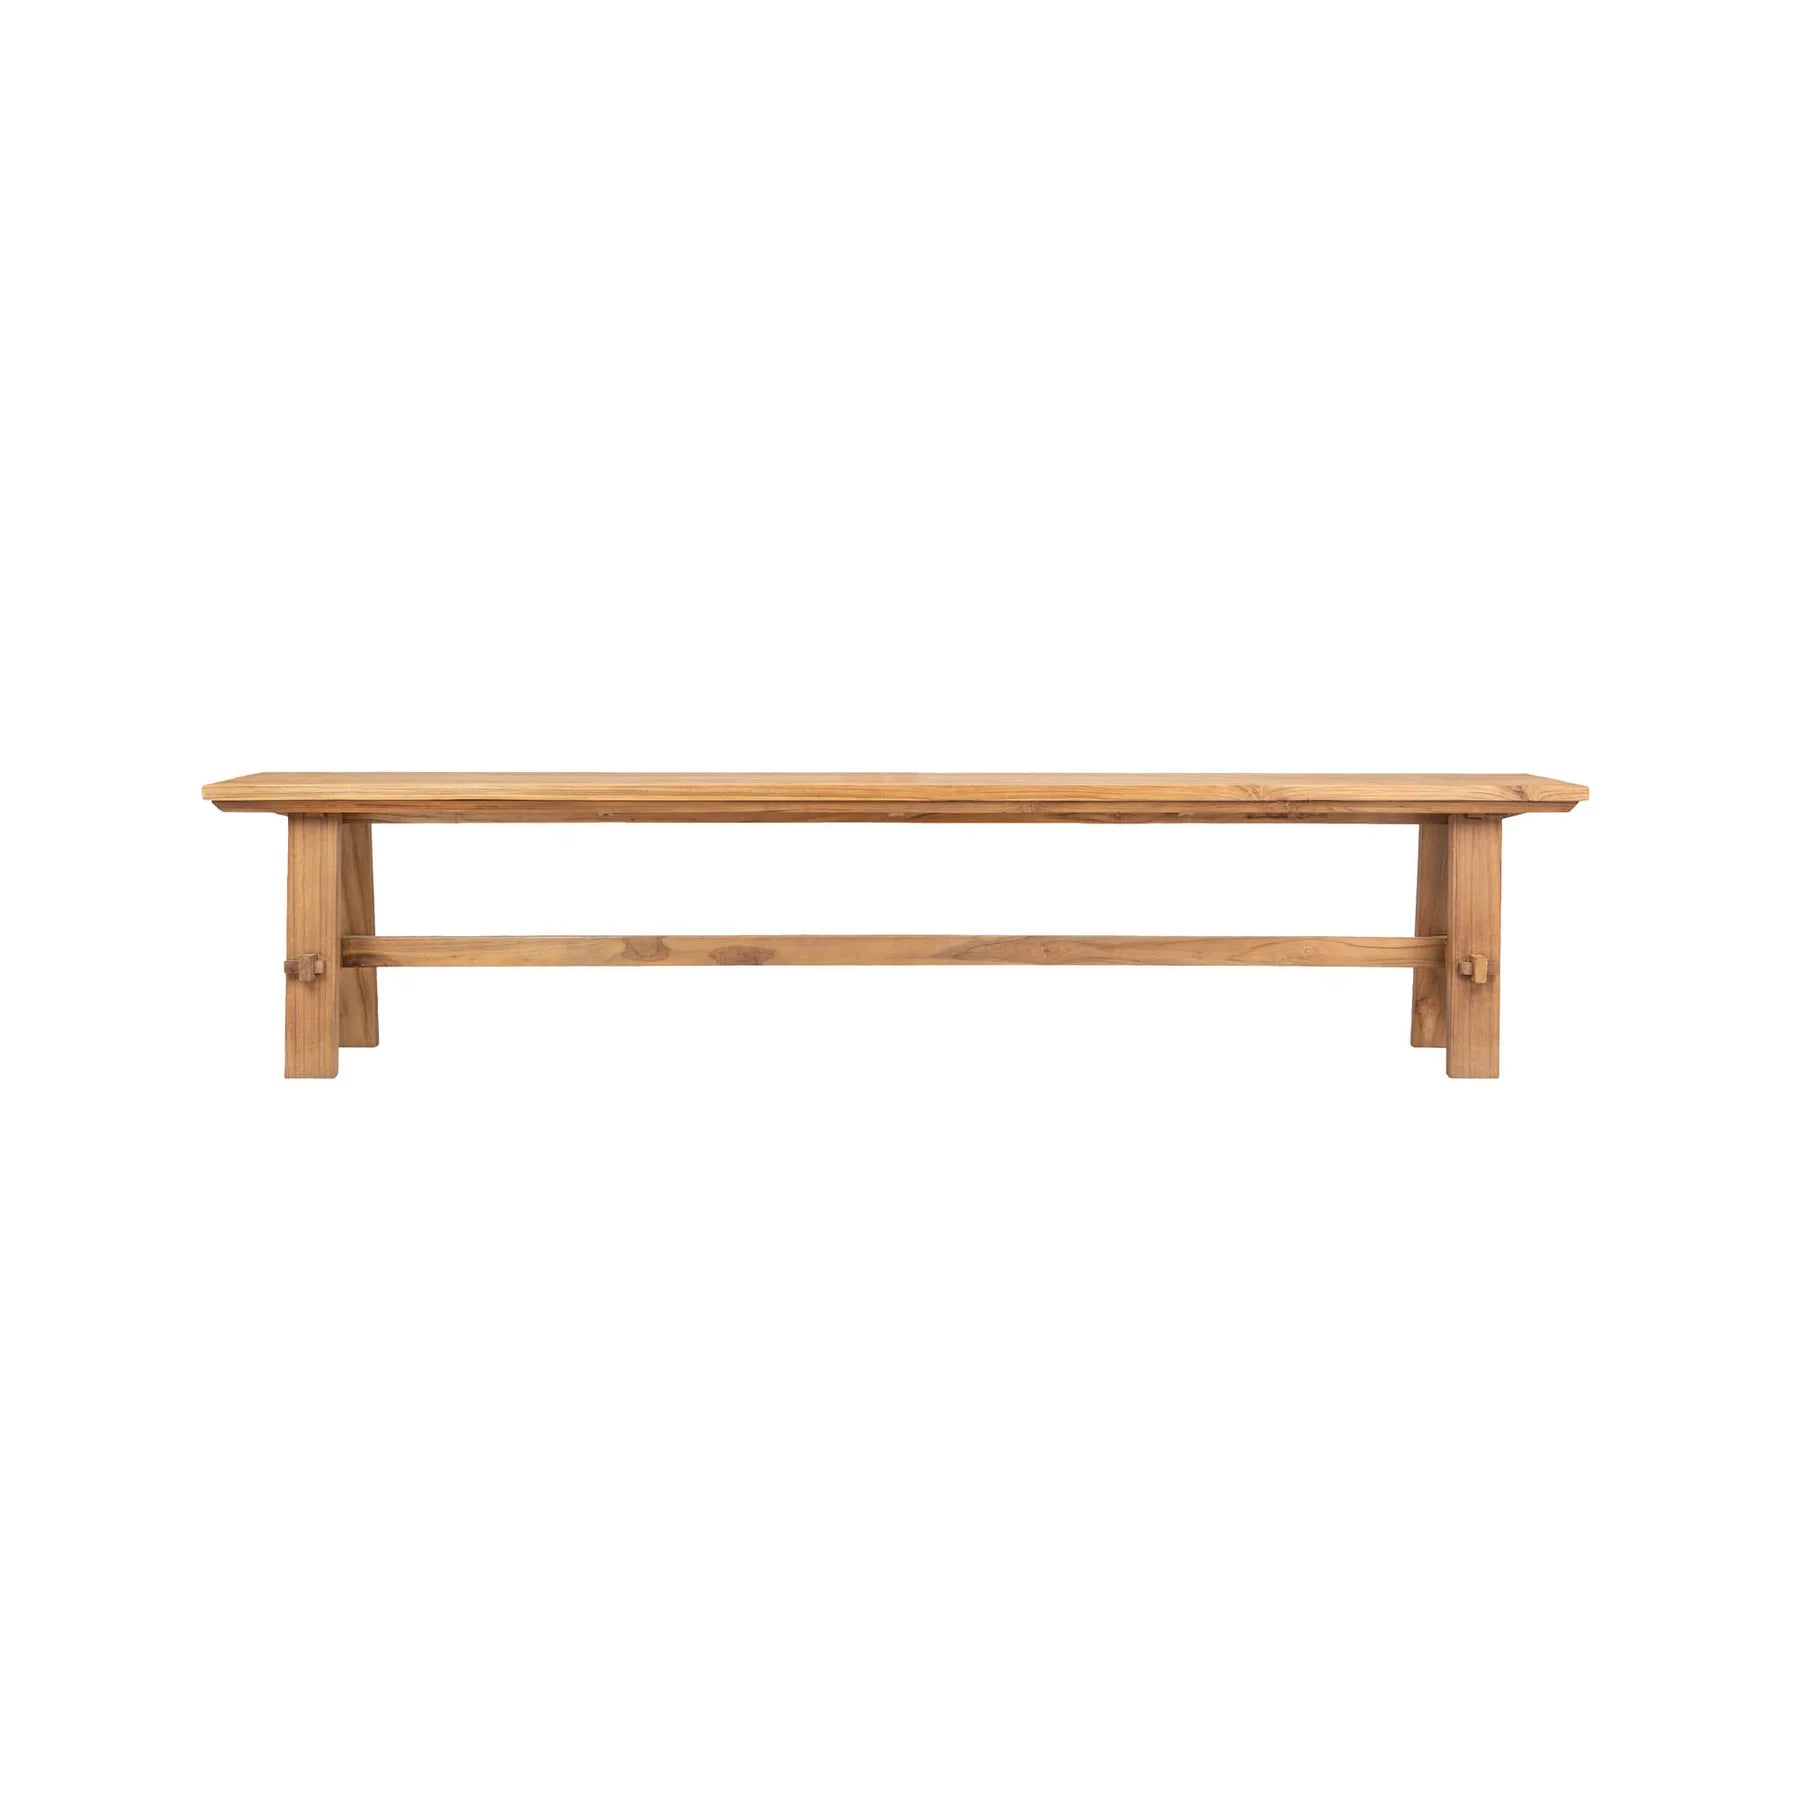 Picture of D-Bodhi Artisan Bench